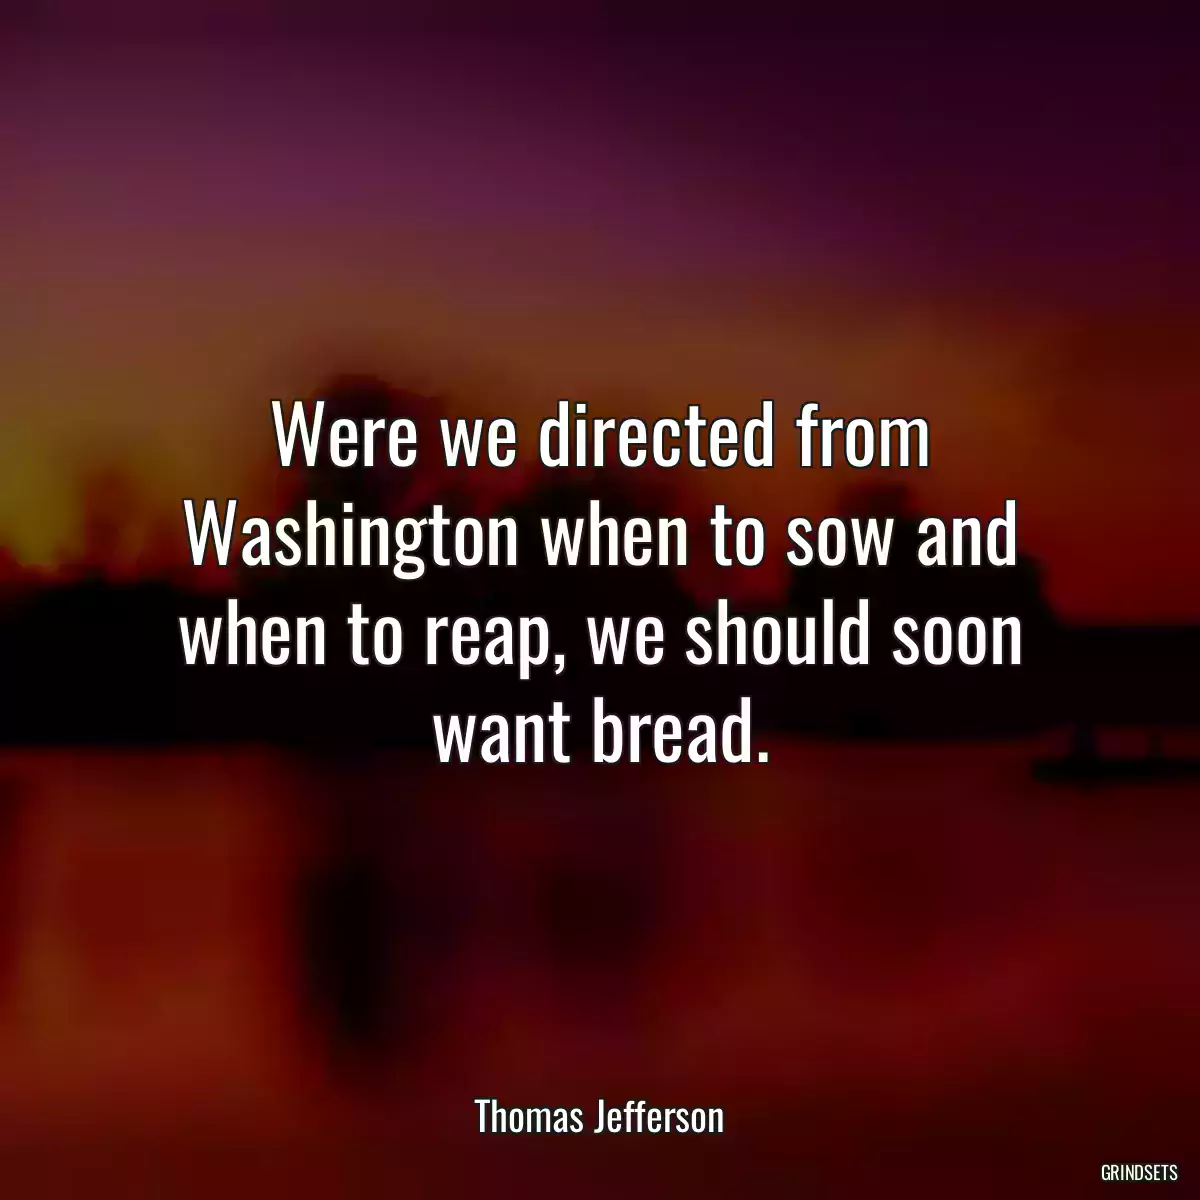 Were we directed from Washington when to sow and when to reap, we should soon want bread.